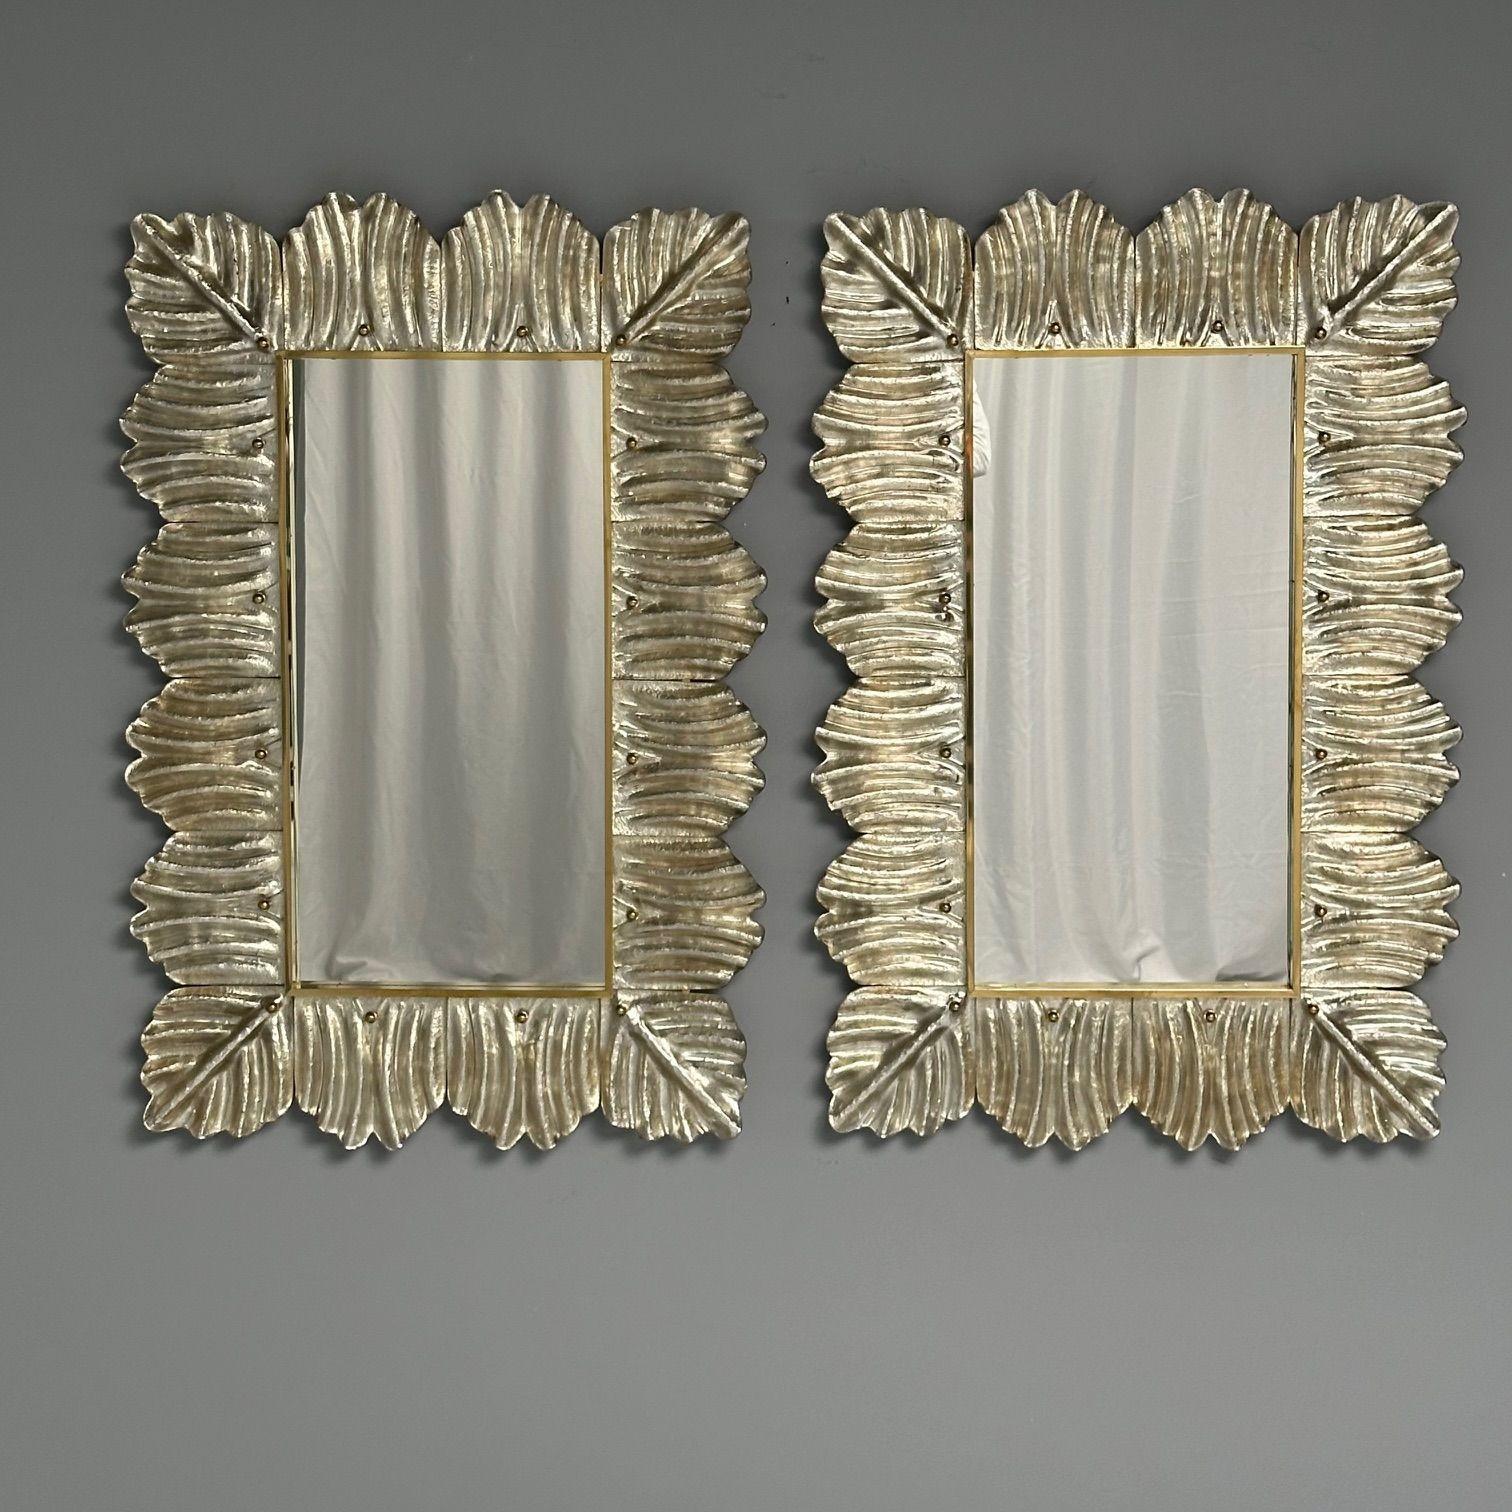 Modern Contemporary, Wall Mirrors, Leaf Motif, Murano Glass, Silver Gilt, Italy, 2023 For Sale